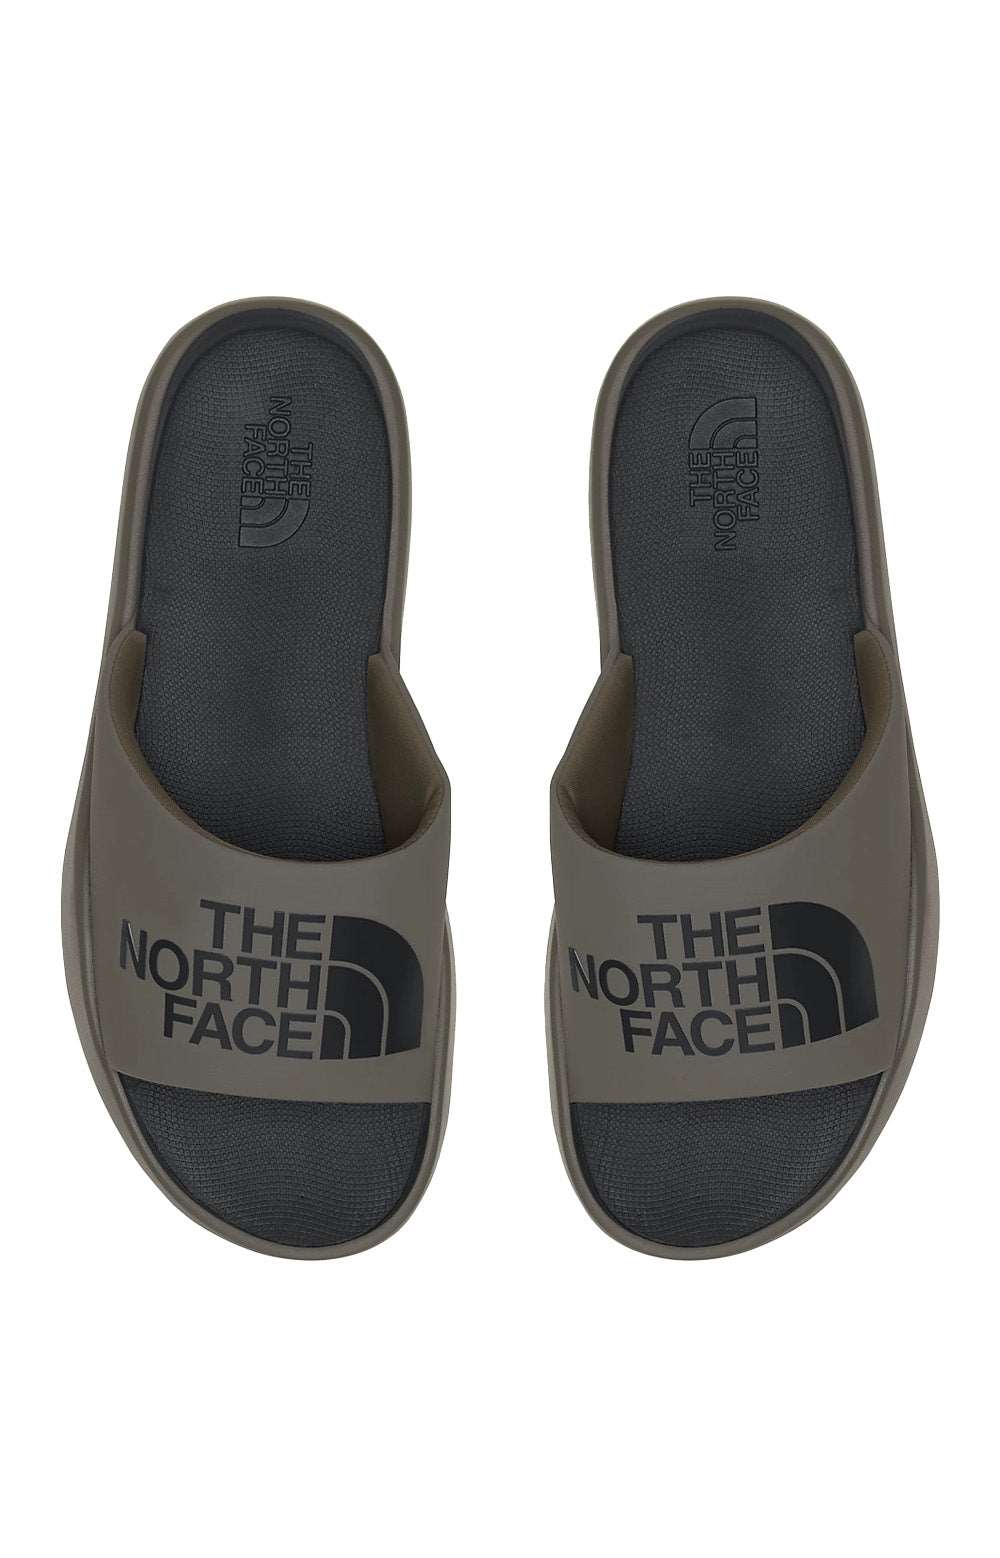 (JCABQW) Triarch Slides - New Taupe Green/TNF Black